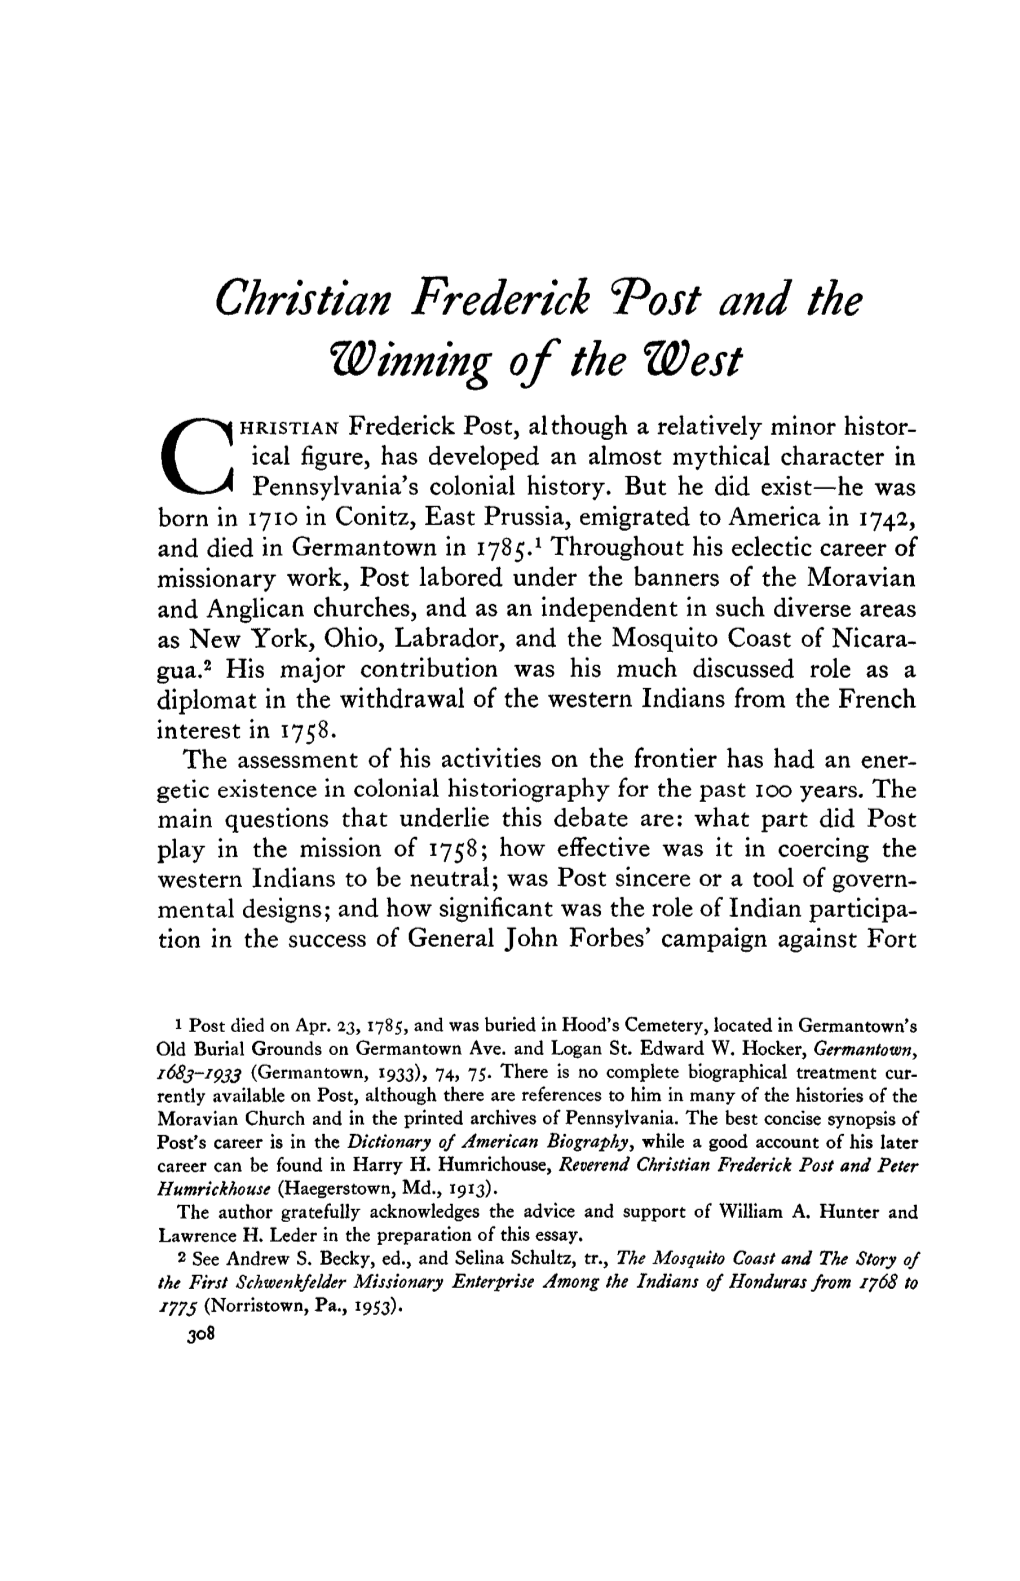 Christian Frederick "Post and the Winning of the West